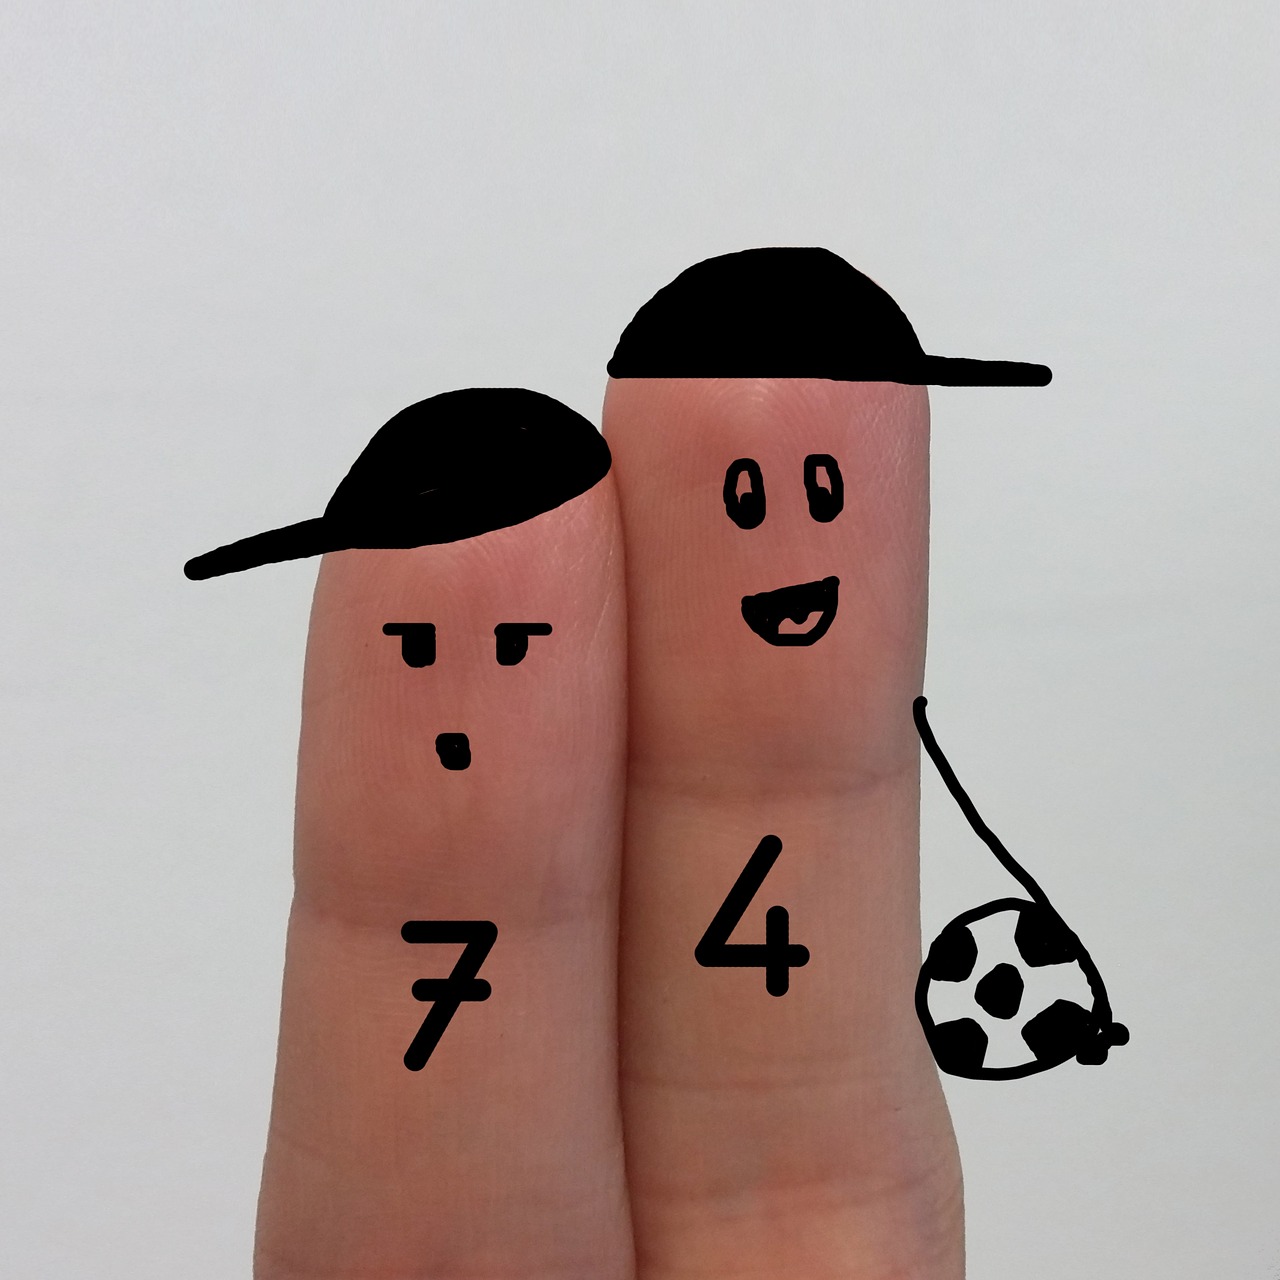 drawing fingers smilies free photo